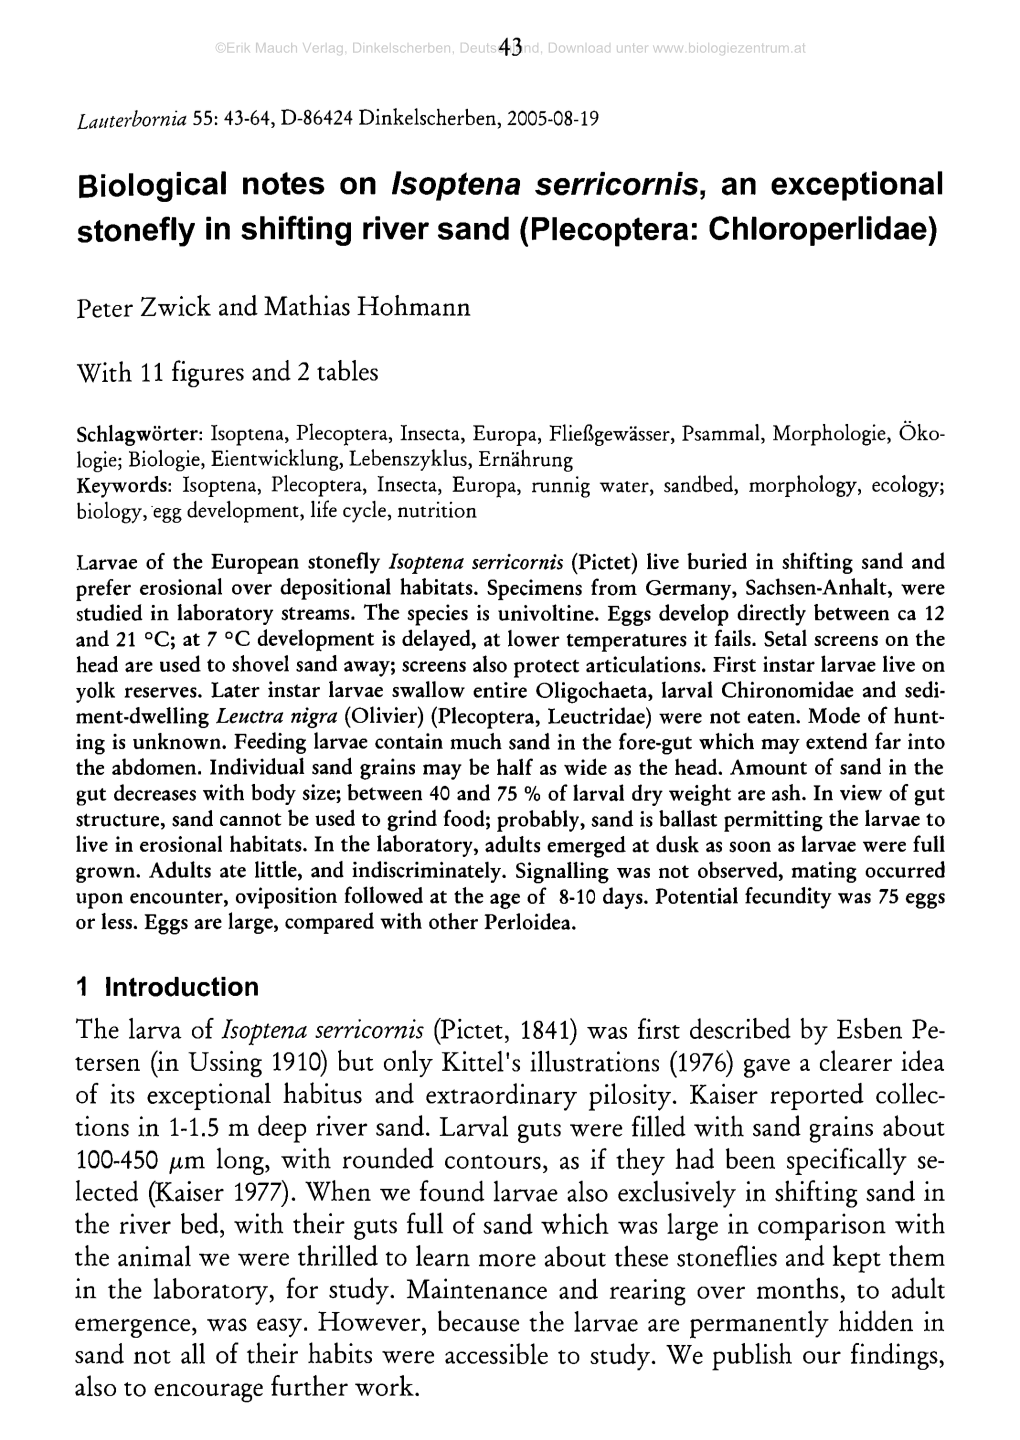 Biological Notes on Isoptena Serricornis, an Exceptional Stonefly in Shifting River Sand (Plecoptera: Chloroperlidae)